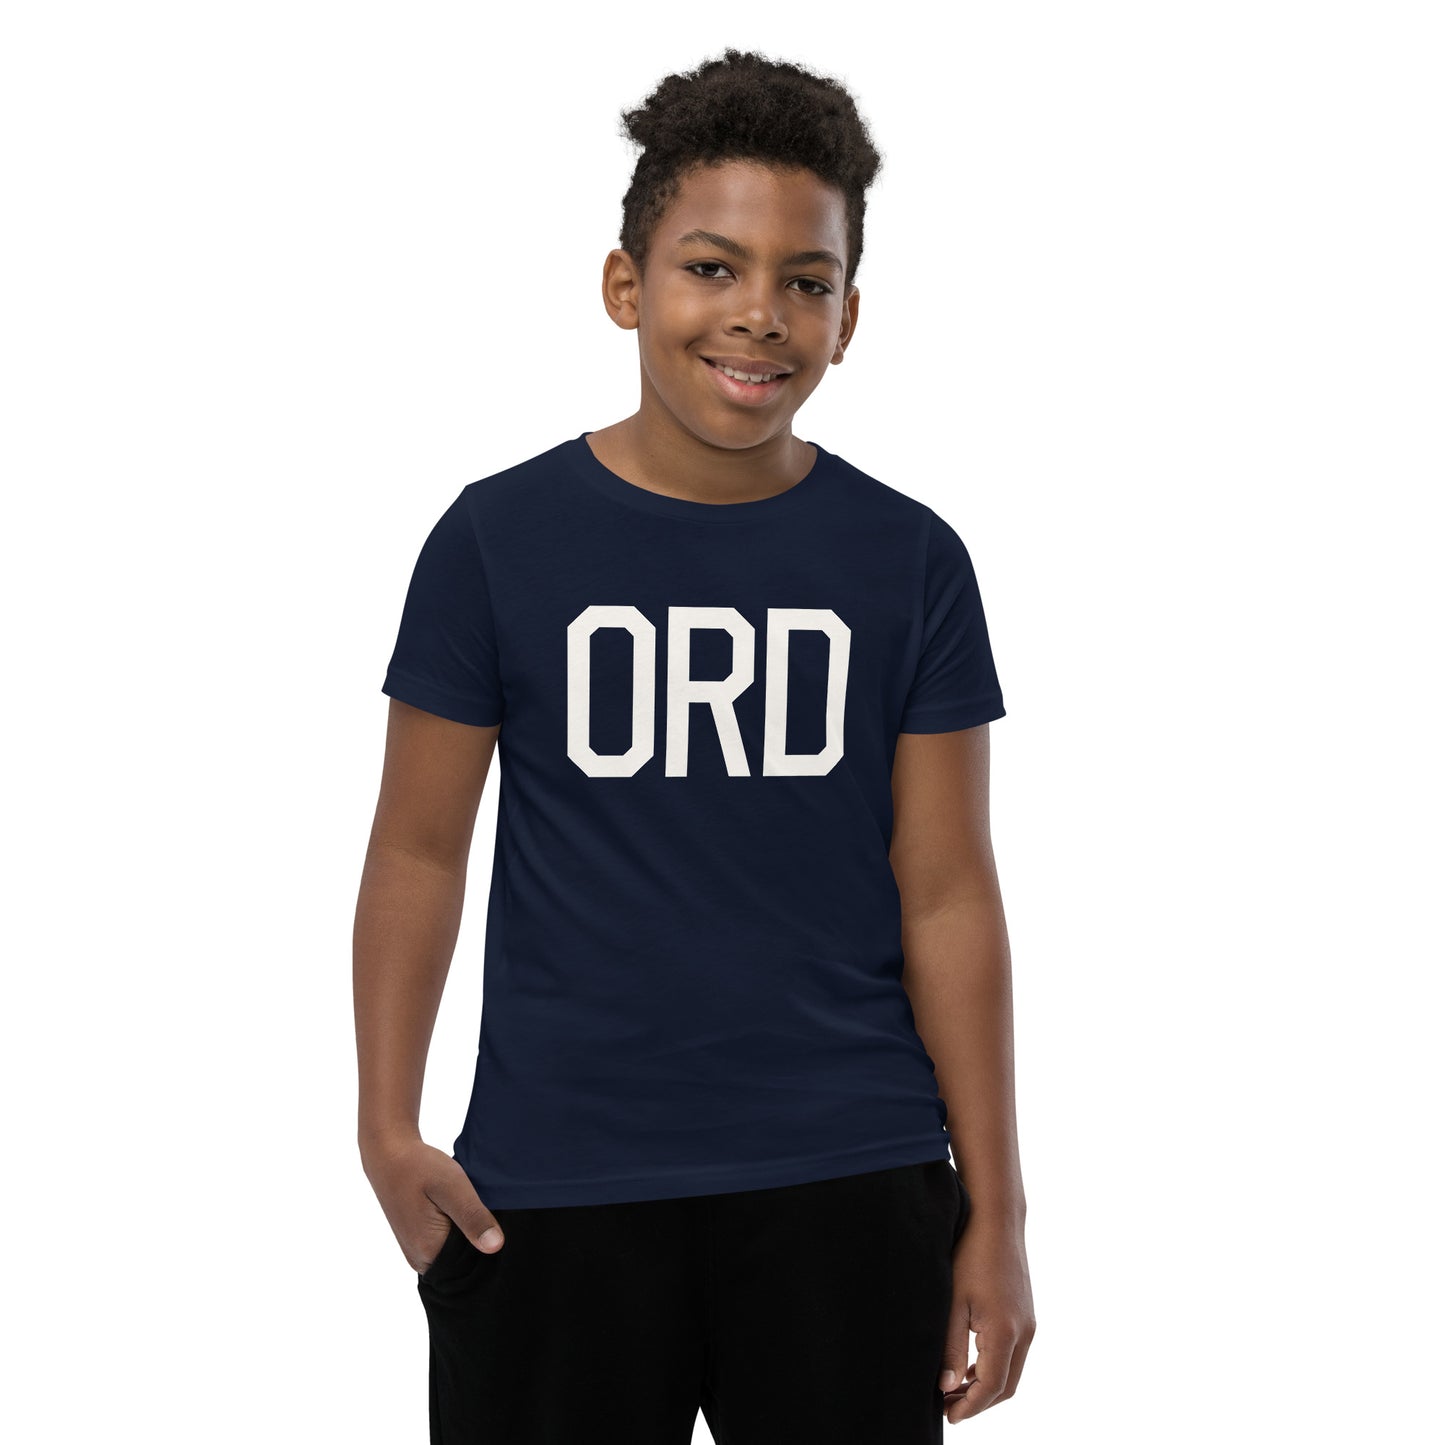 Kid's T-Shirt - White Graphic • ORD Chicago • YHM Designs - Image 01